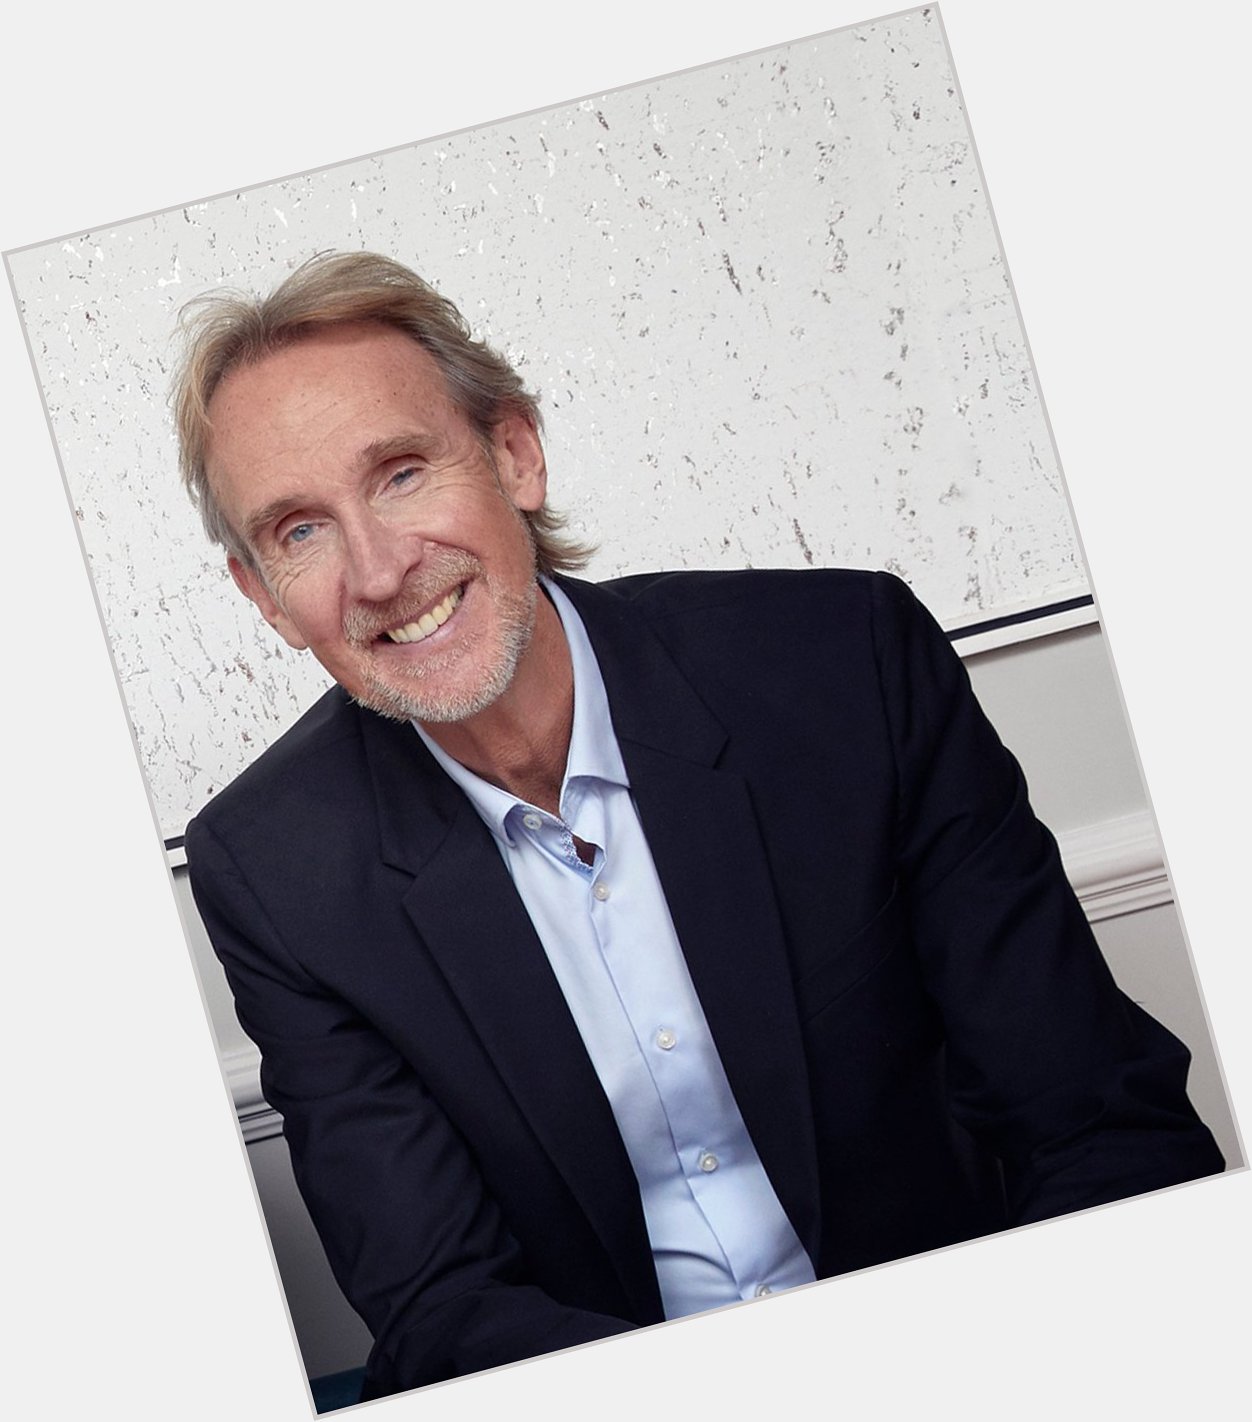 Happy birthday to our very own Mike Rutherford. Wishing you a very happy 71st today! 